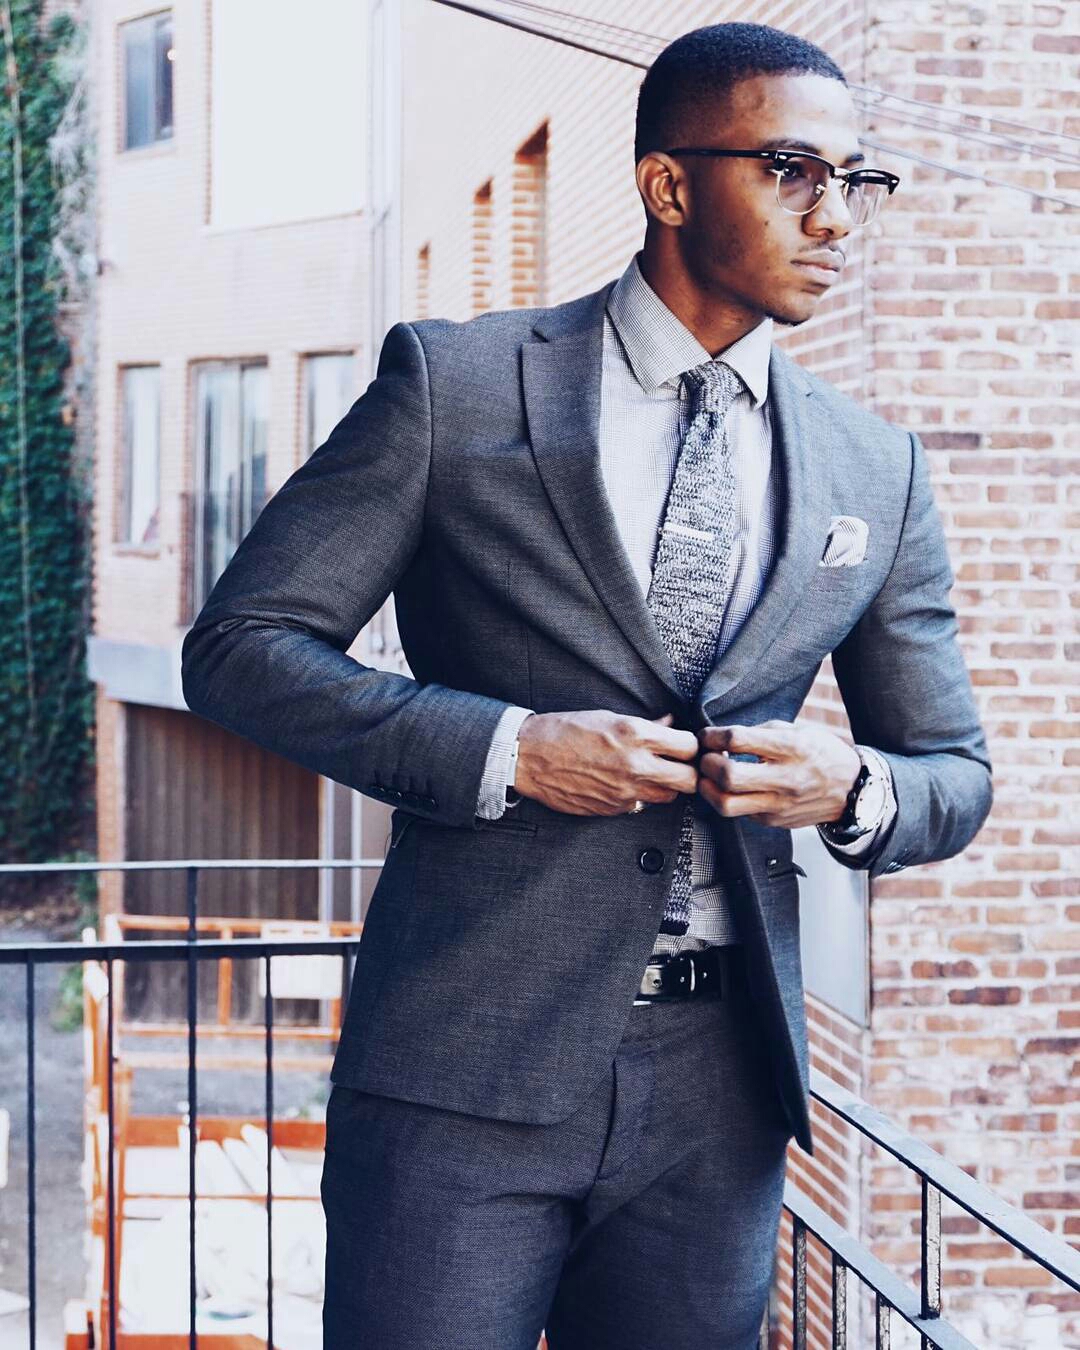 Men's Guide: How To Dress For Your Next Interview - FOLAPFASHION